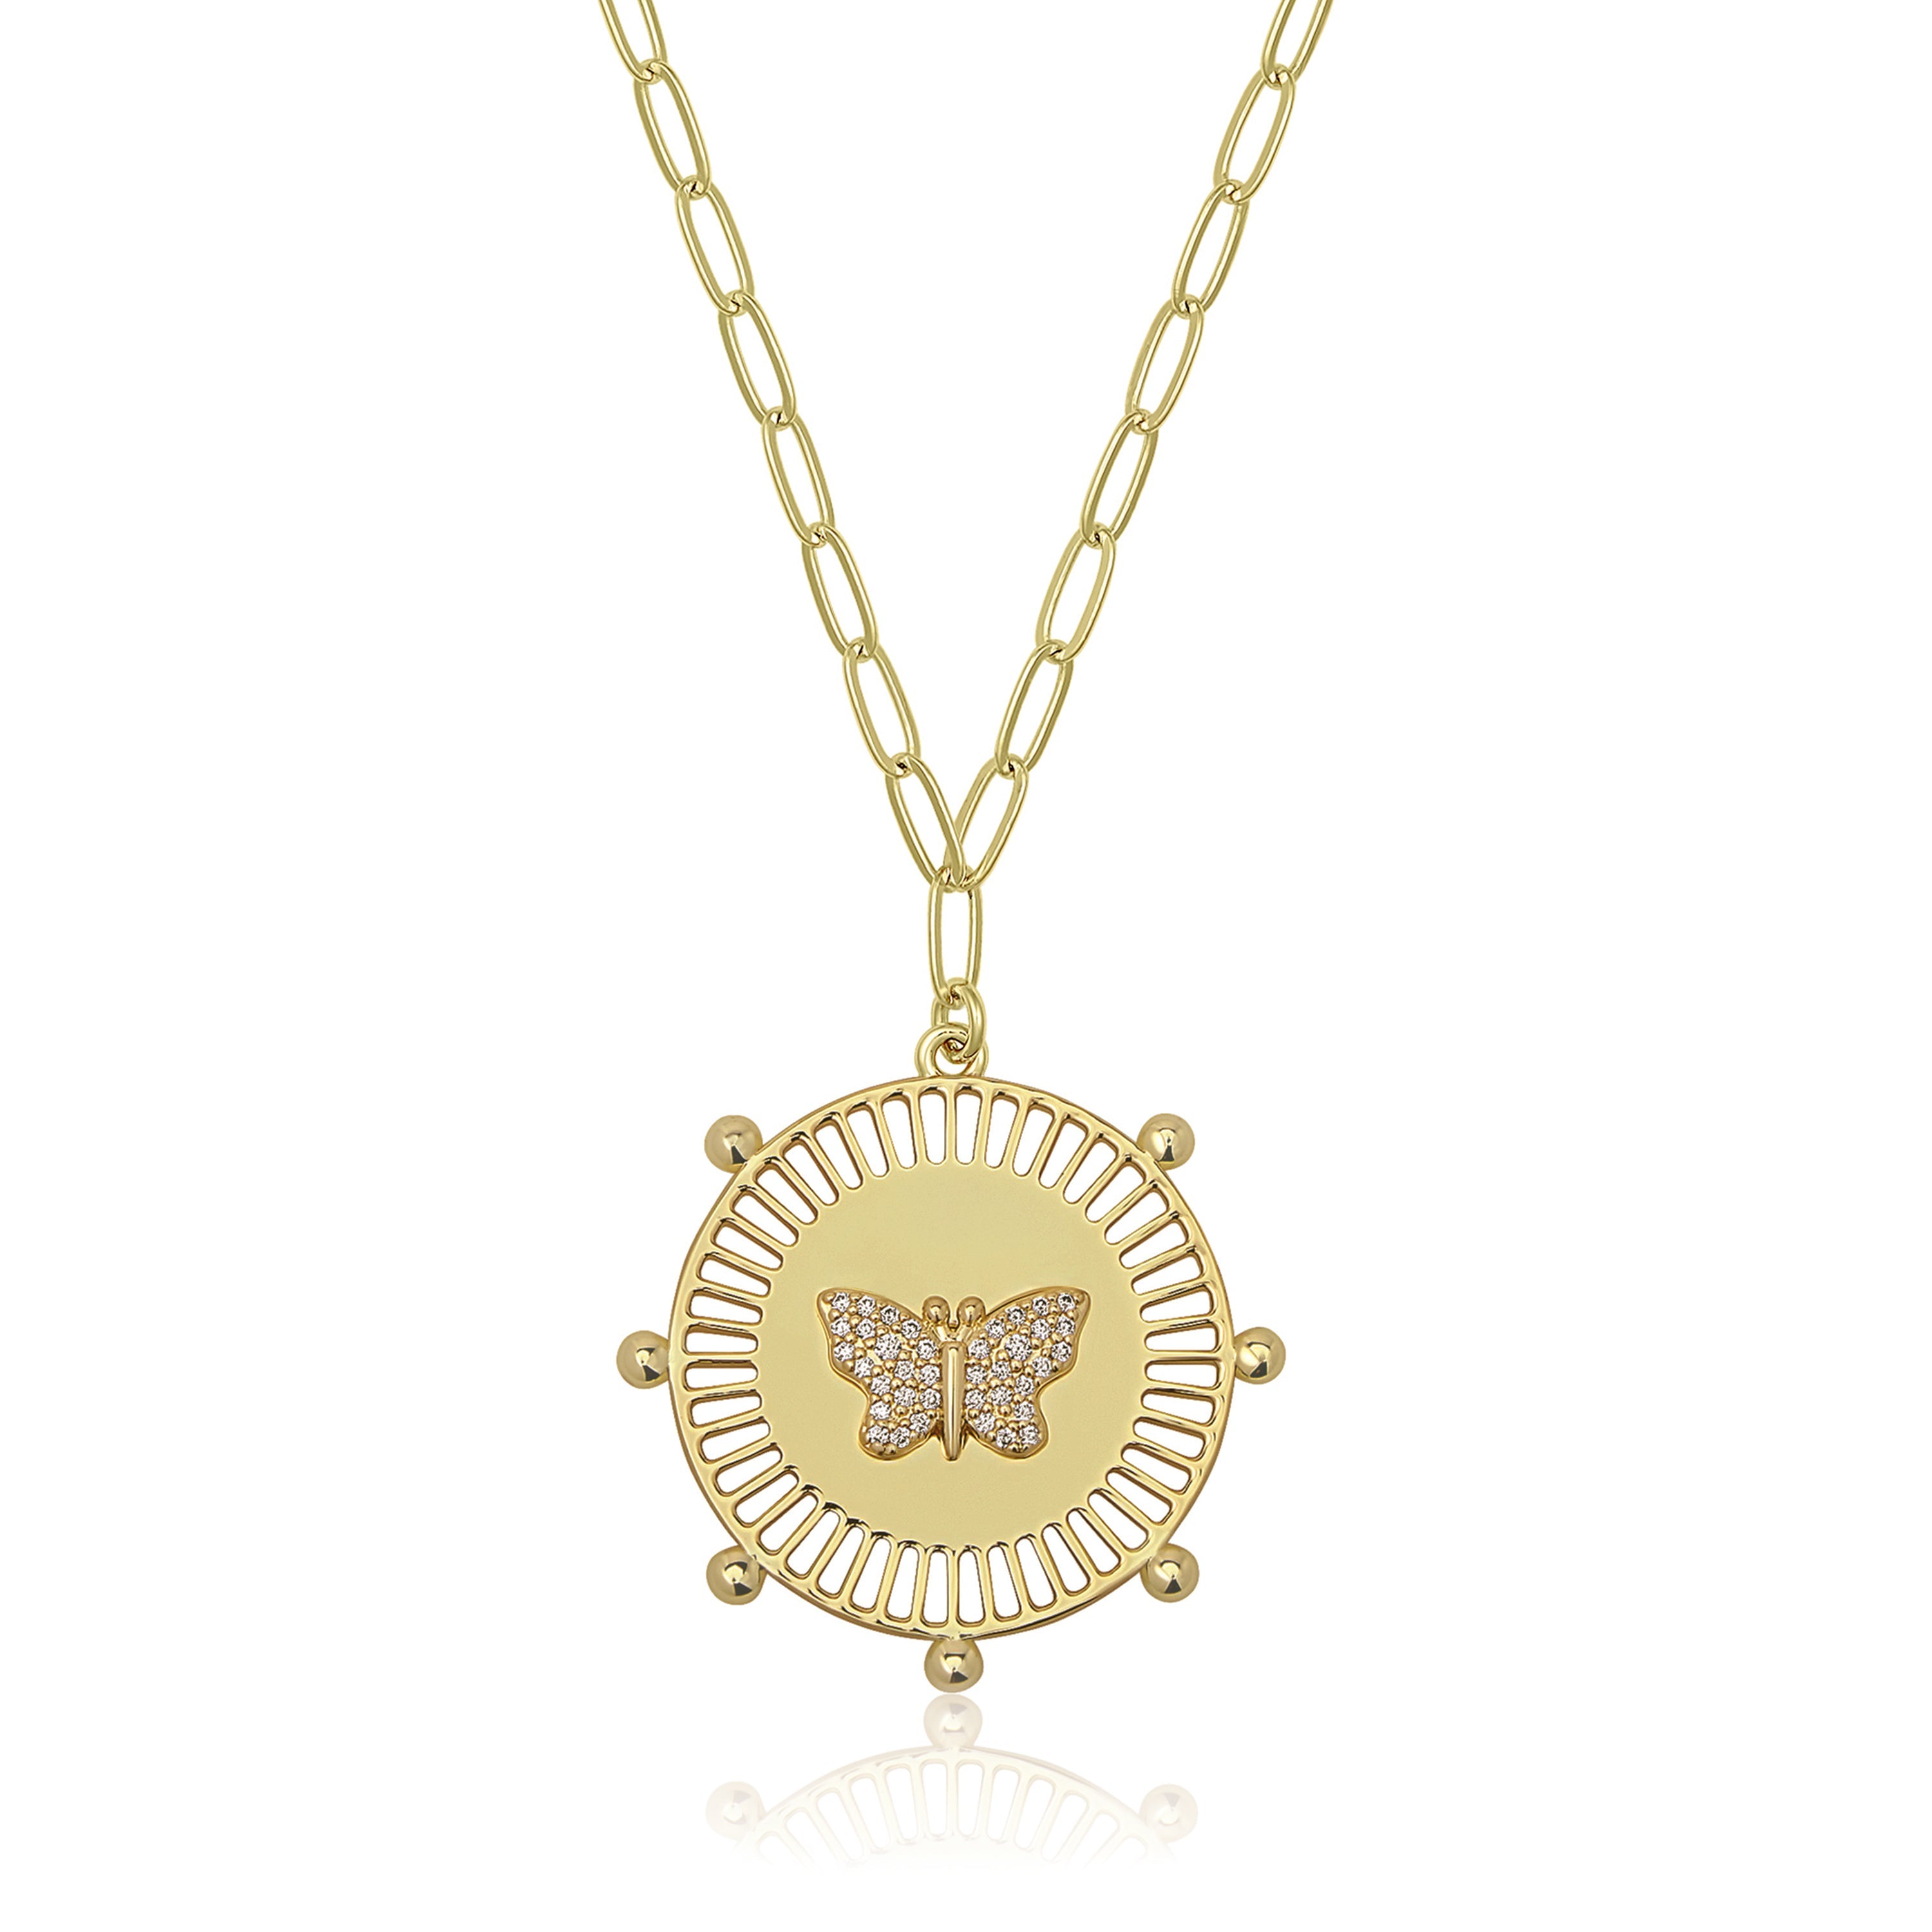 Rachel Zoe Butterfly 🦋 Necklace Gold - $28 (30% Off Retail) - From Becky